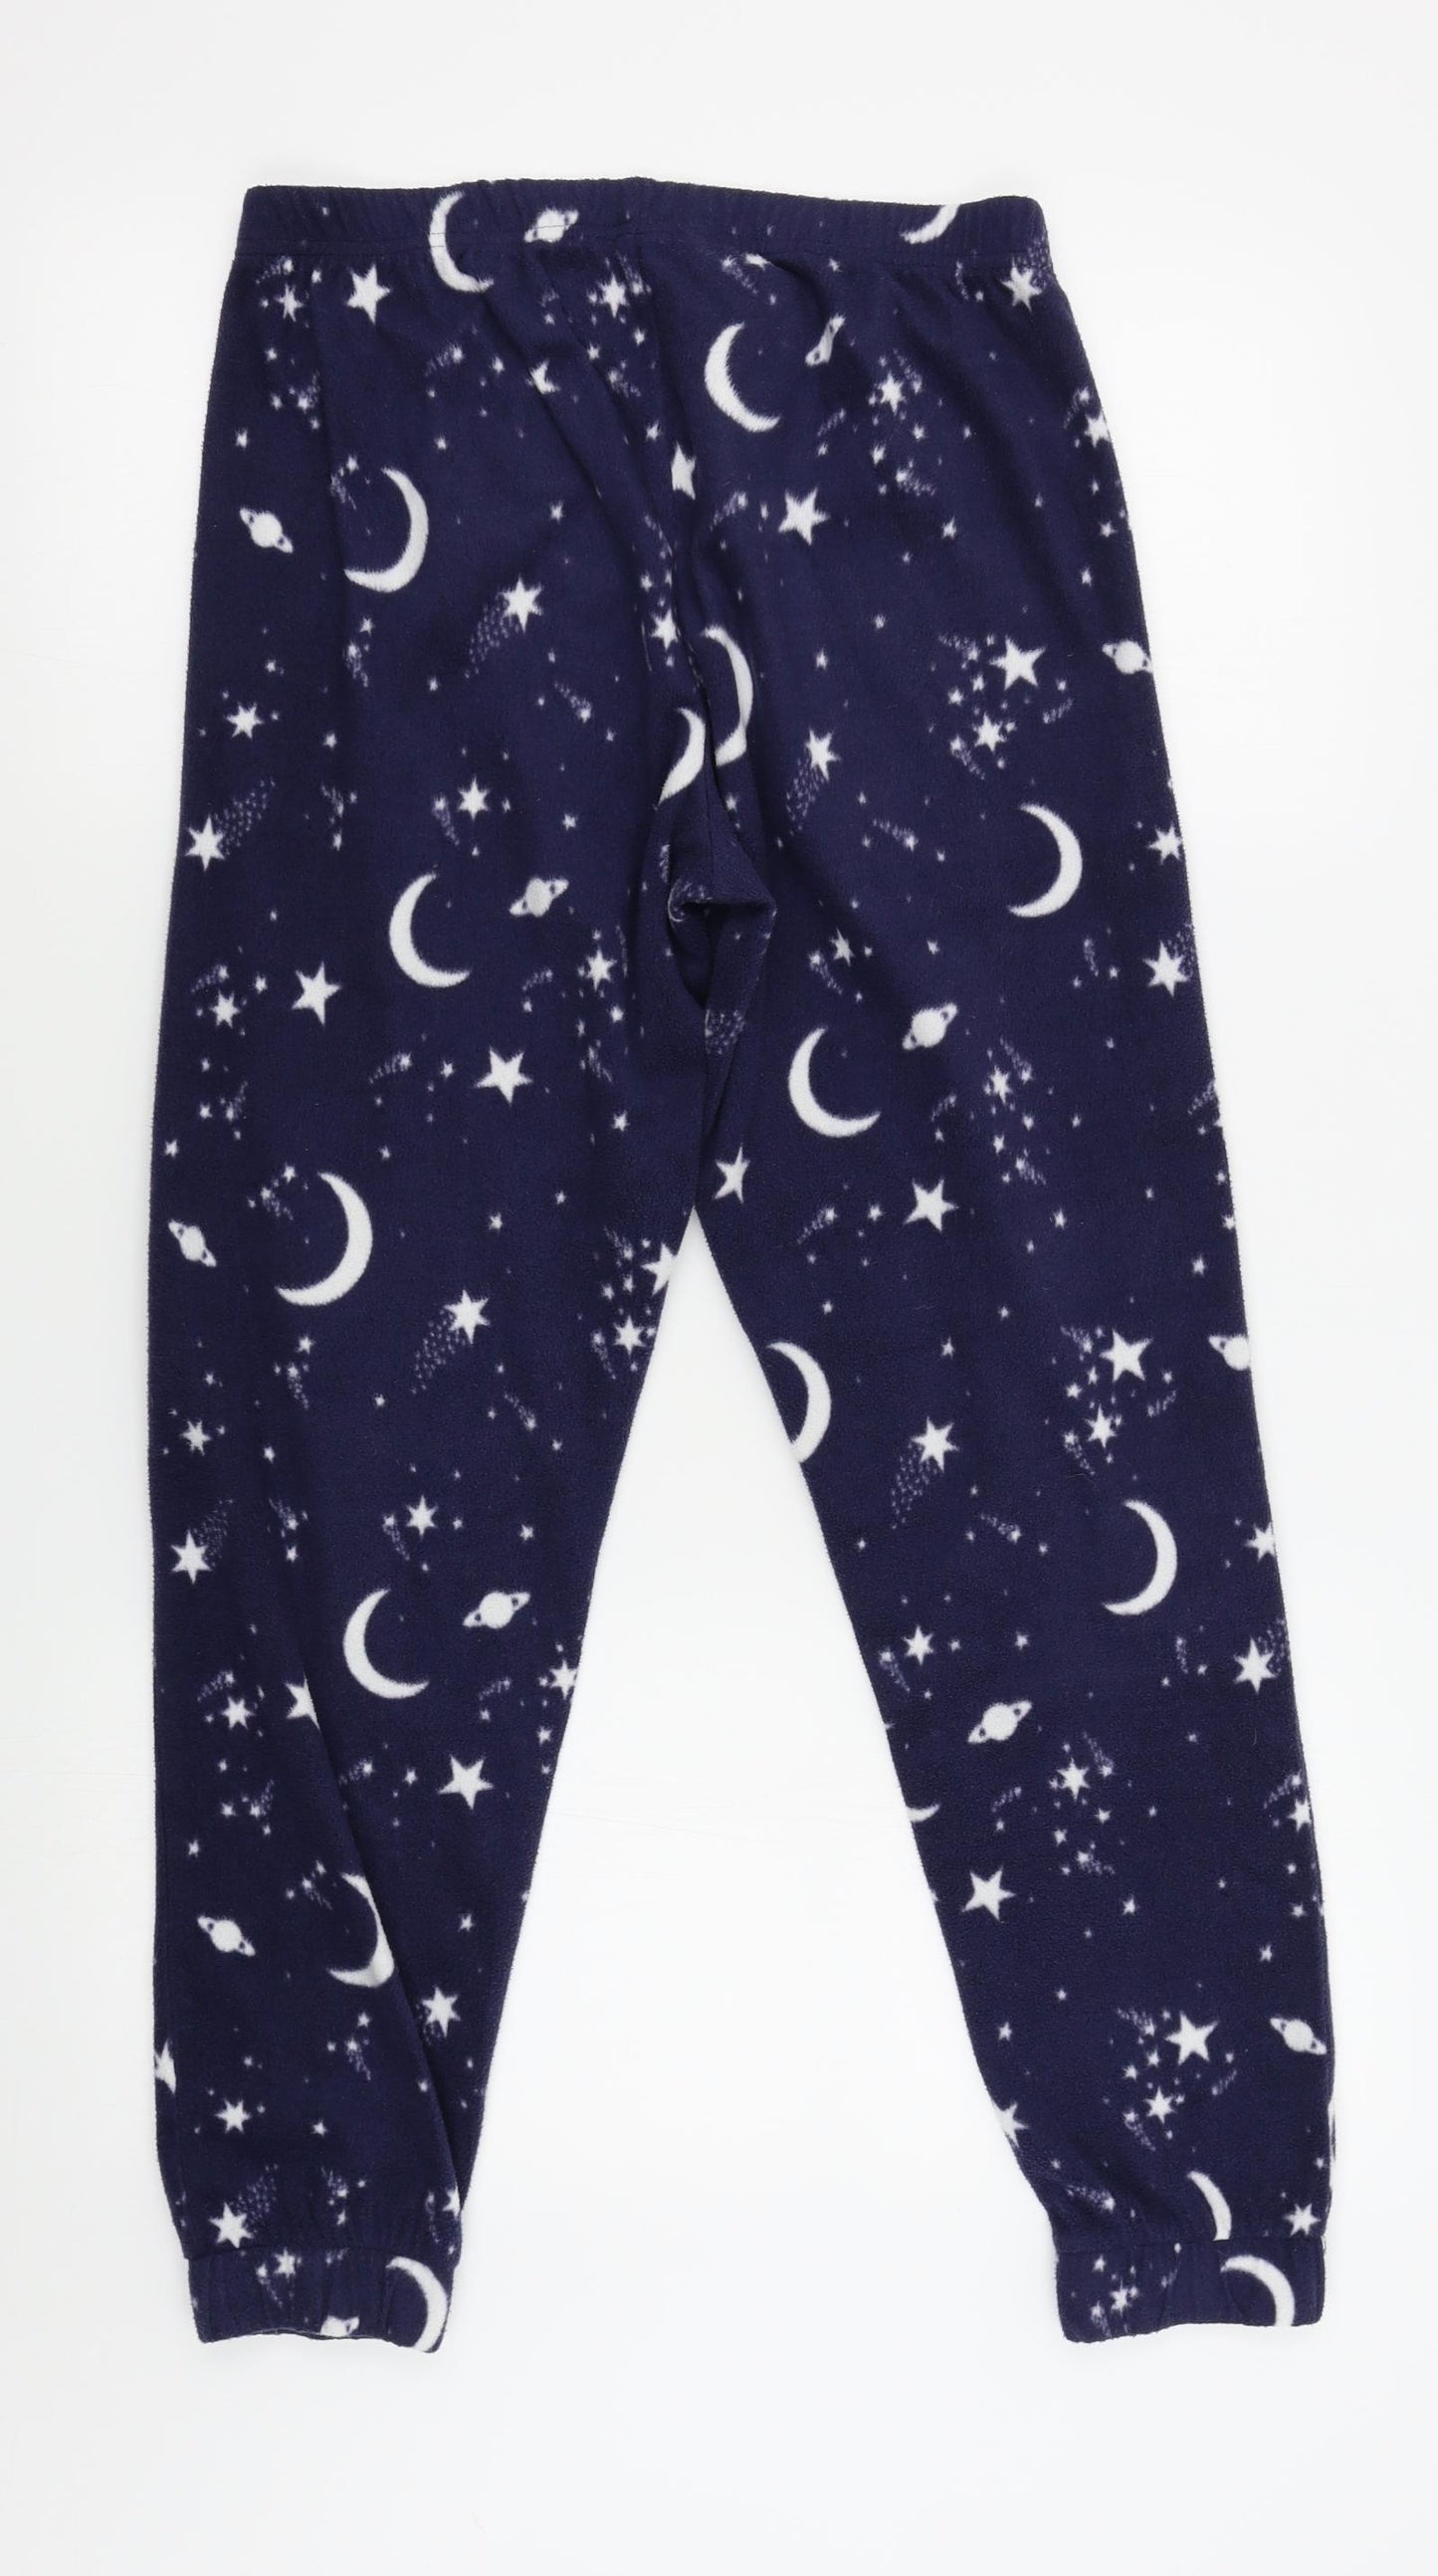 George Girls Blue    Lounge Pants Size 8-9 Years  - starry pattern